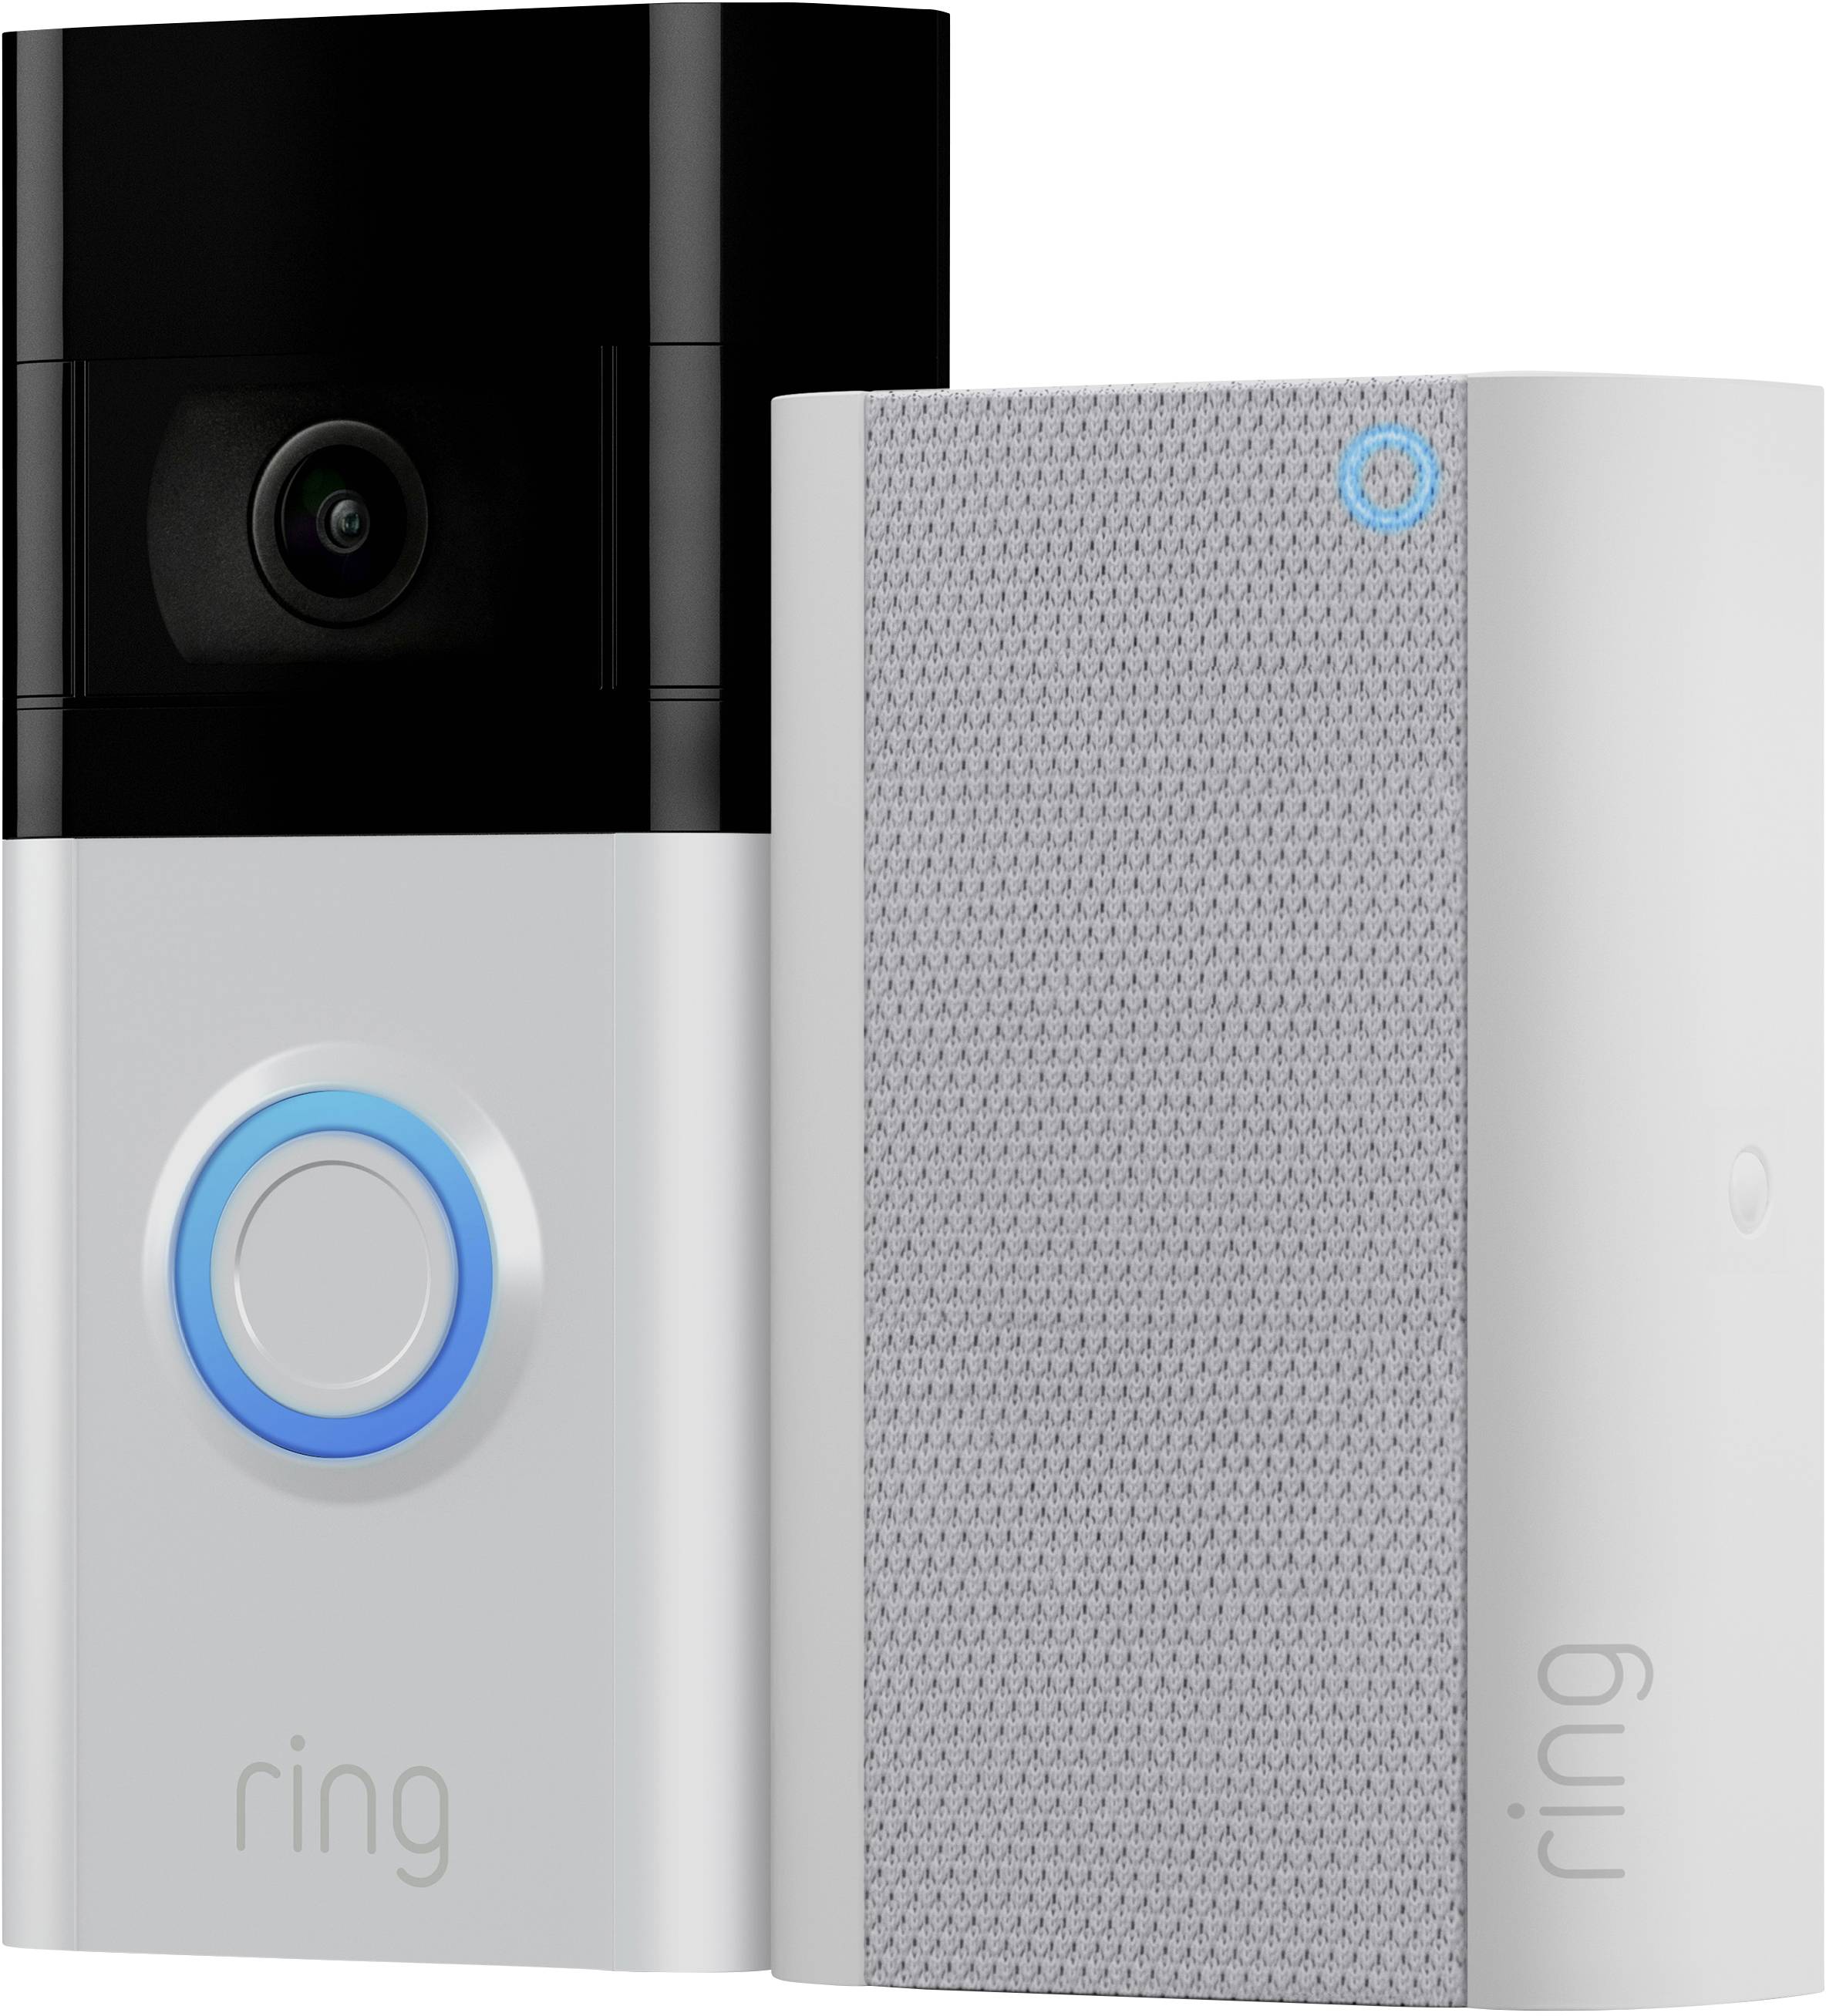 Why Your Ring Camera (Or Doorbell) Makes A Clicking Noise